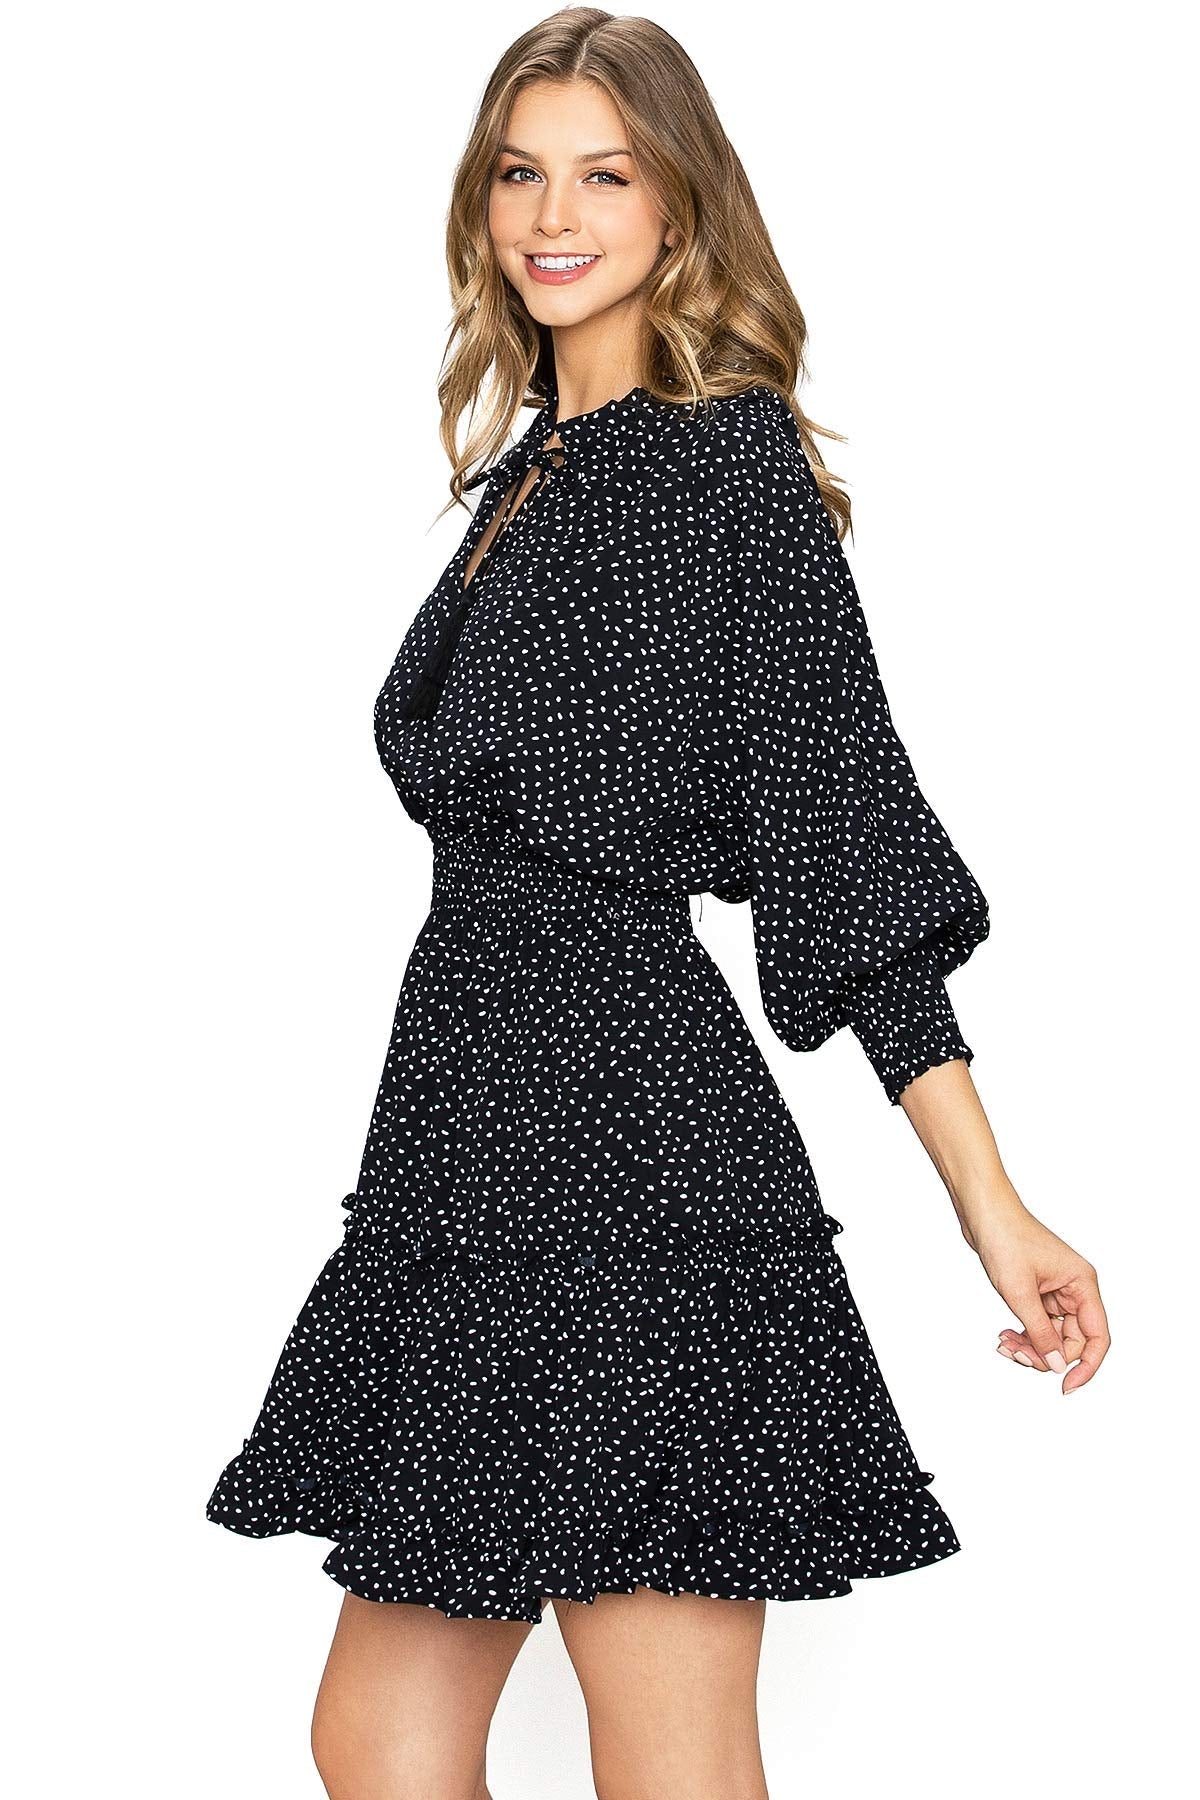 Everly Speckle Dress